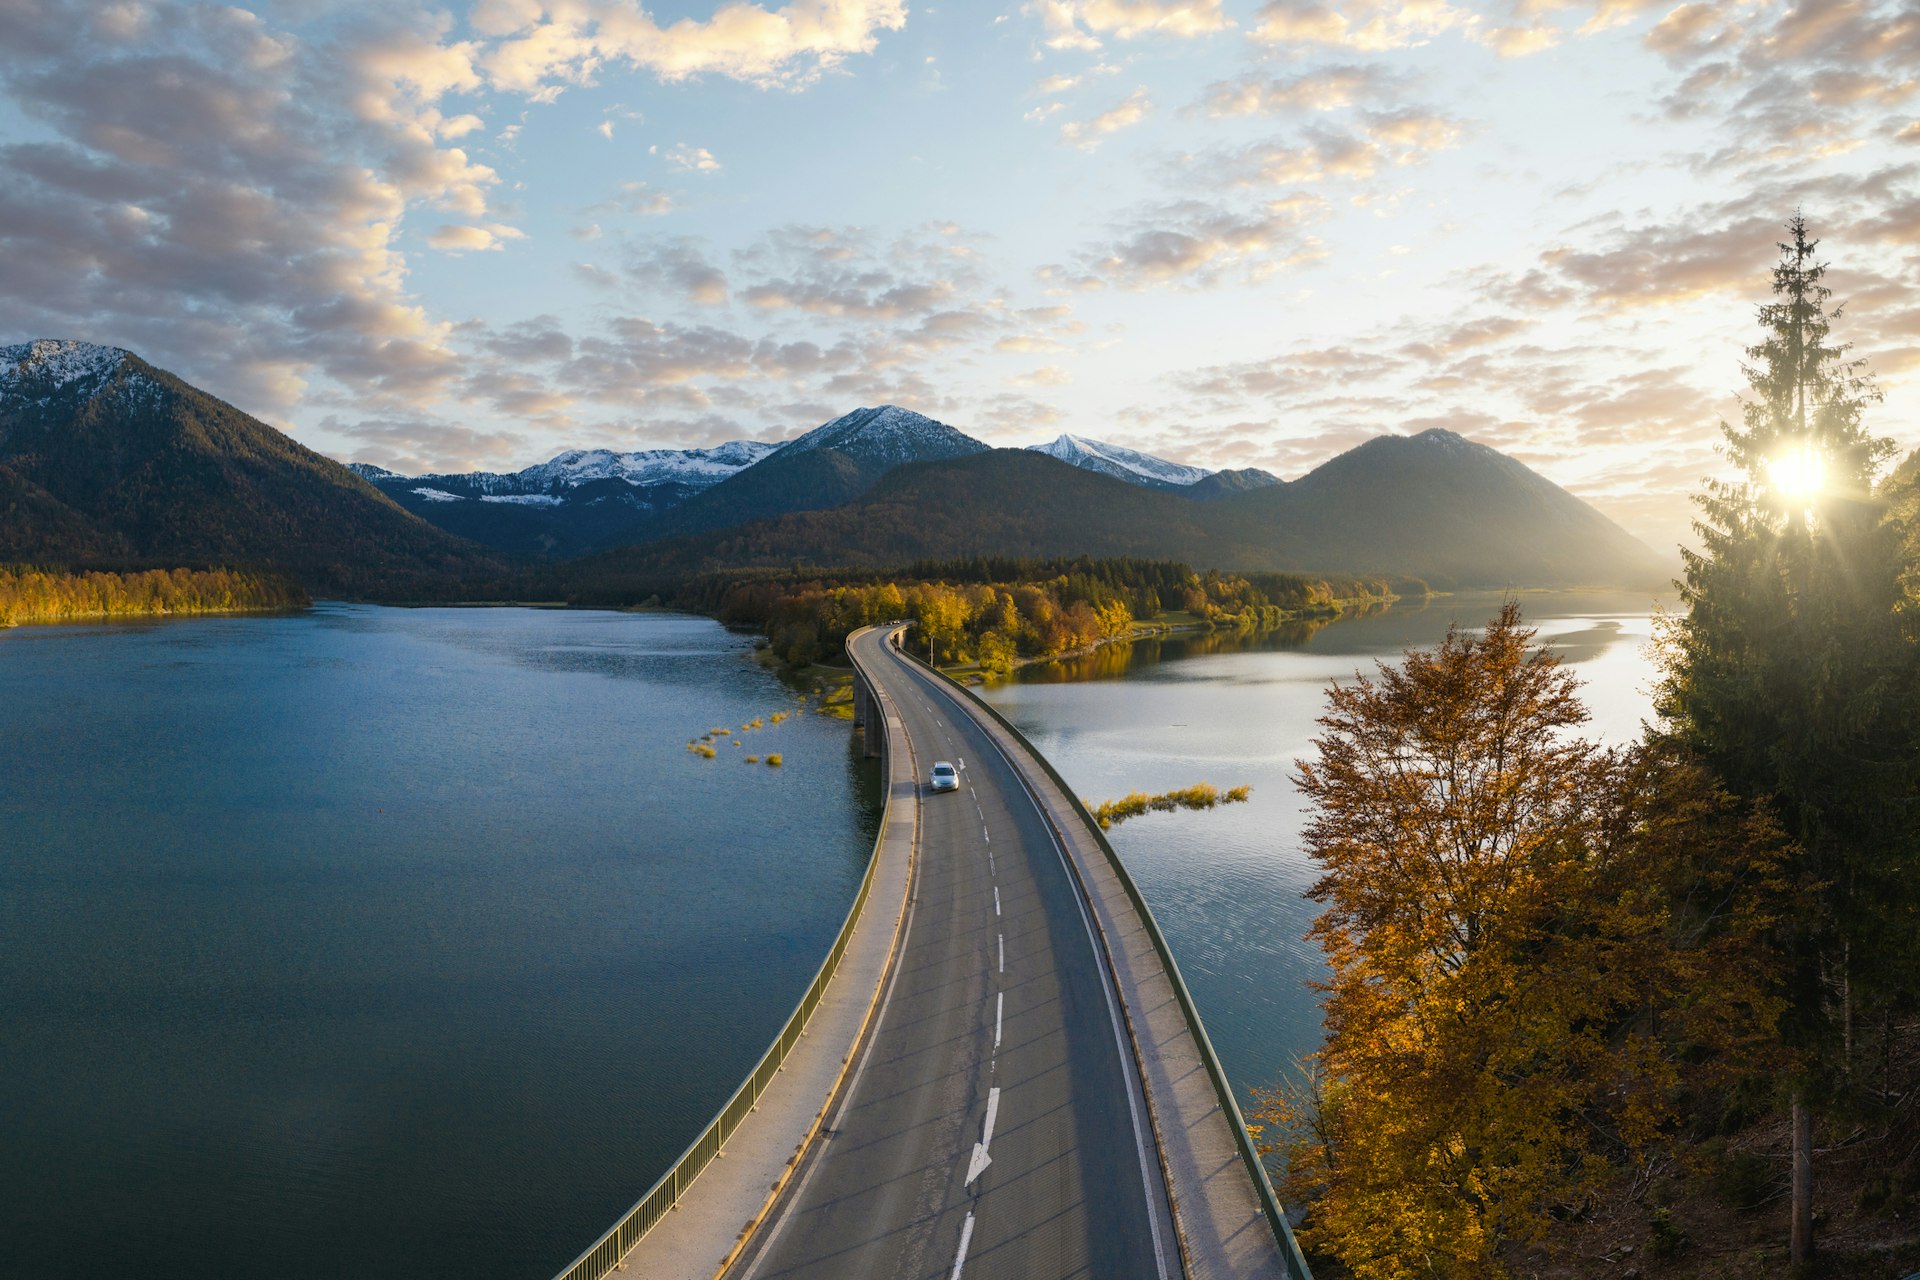 A car follows a well-maintained road over a lake as the sun sets behind distant mountains